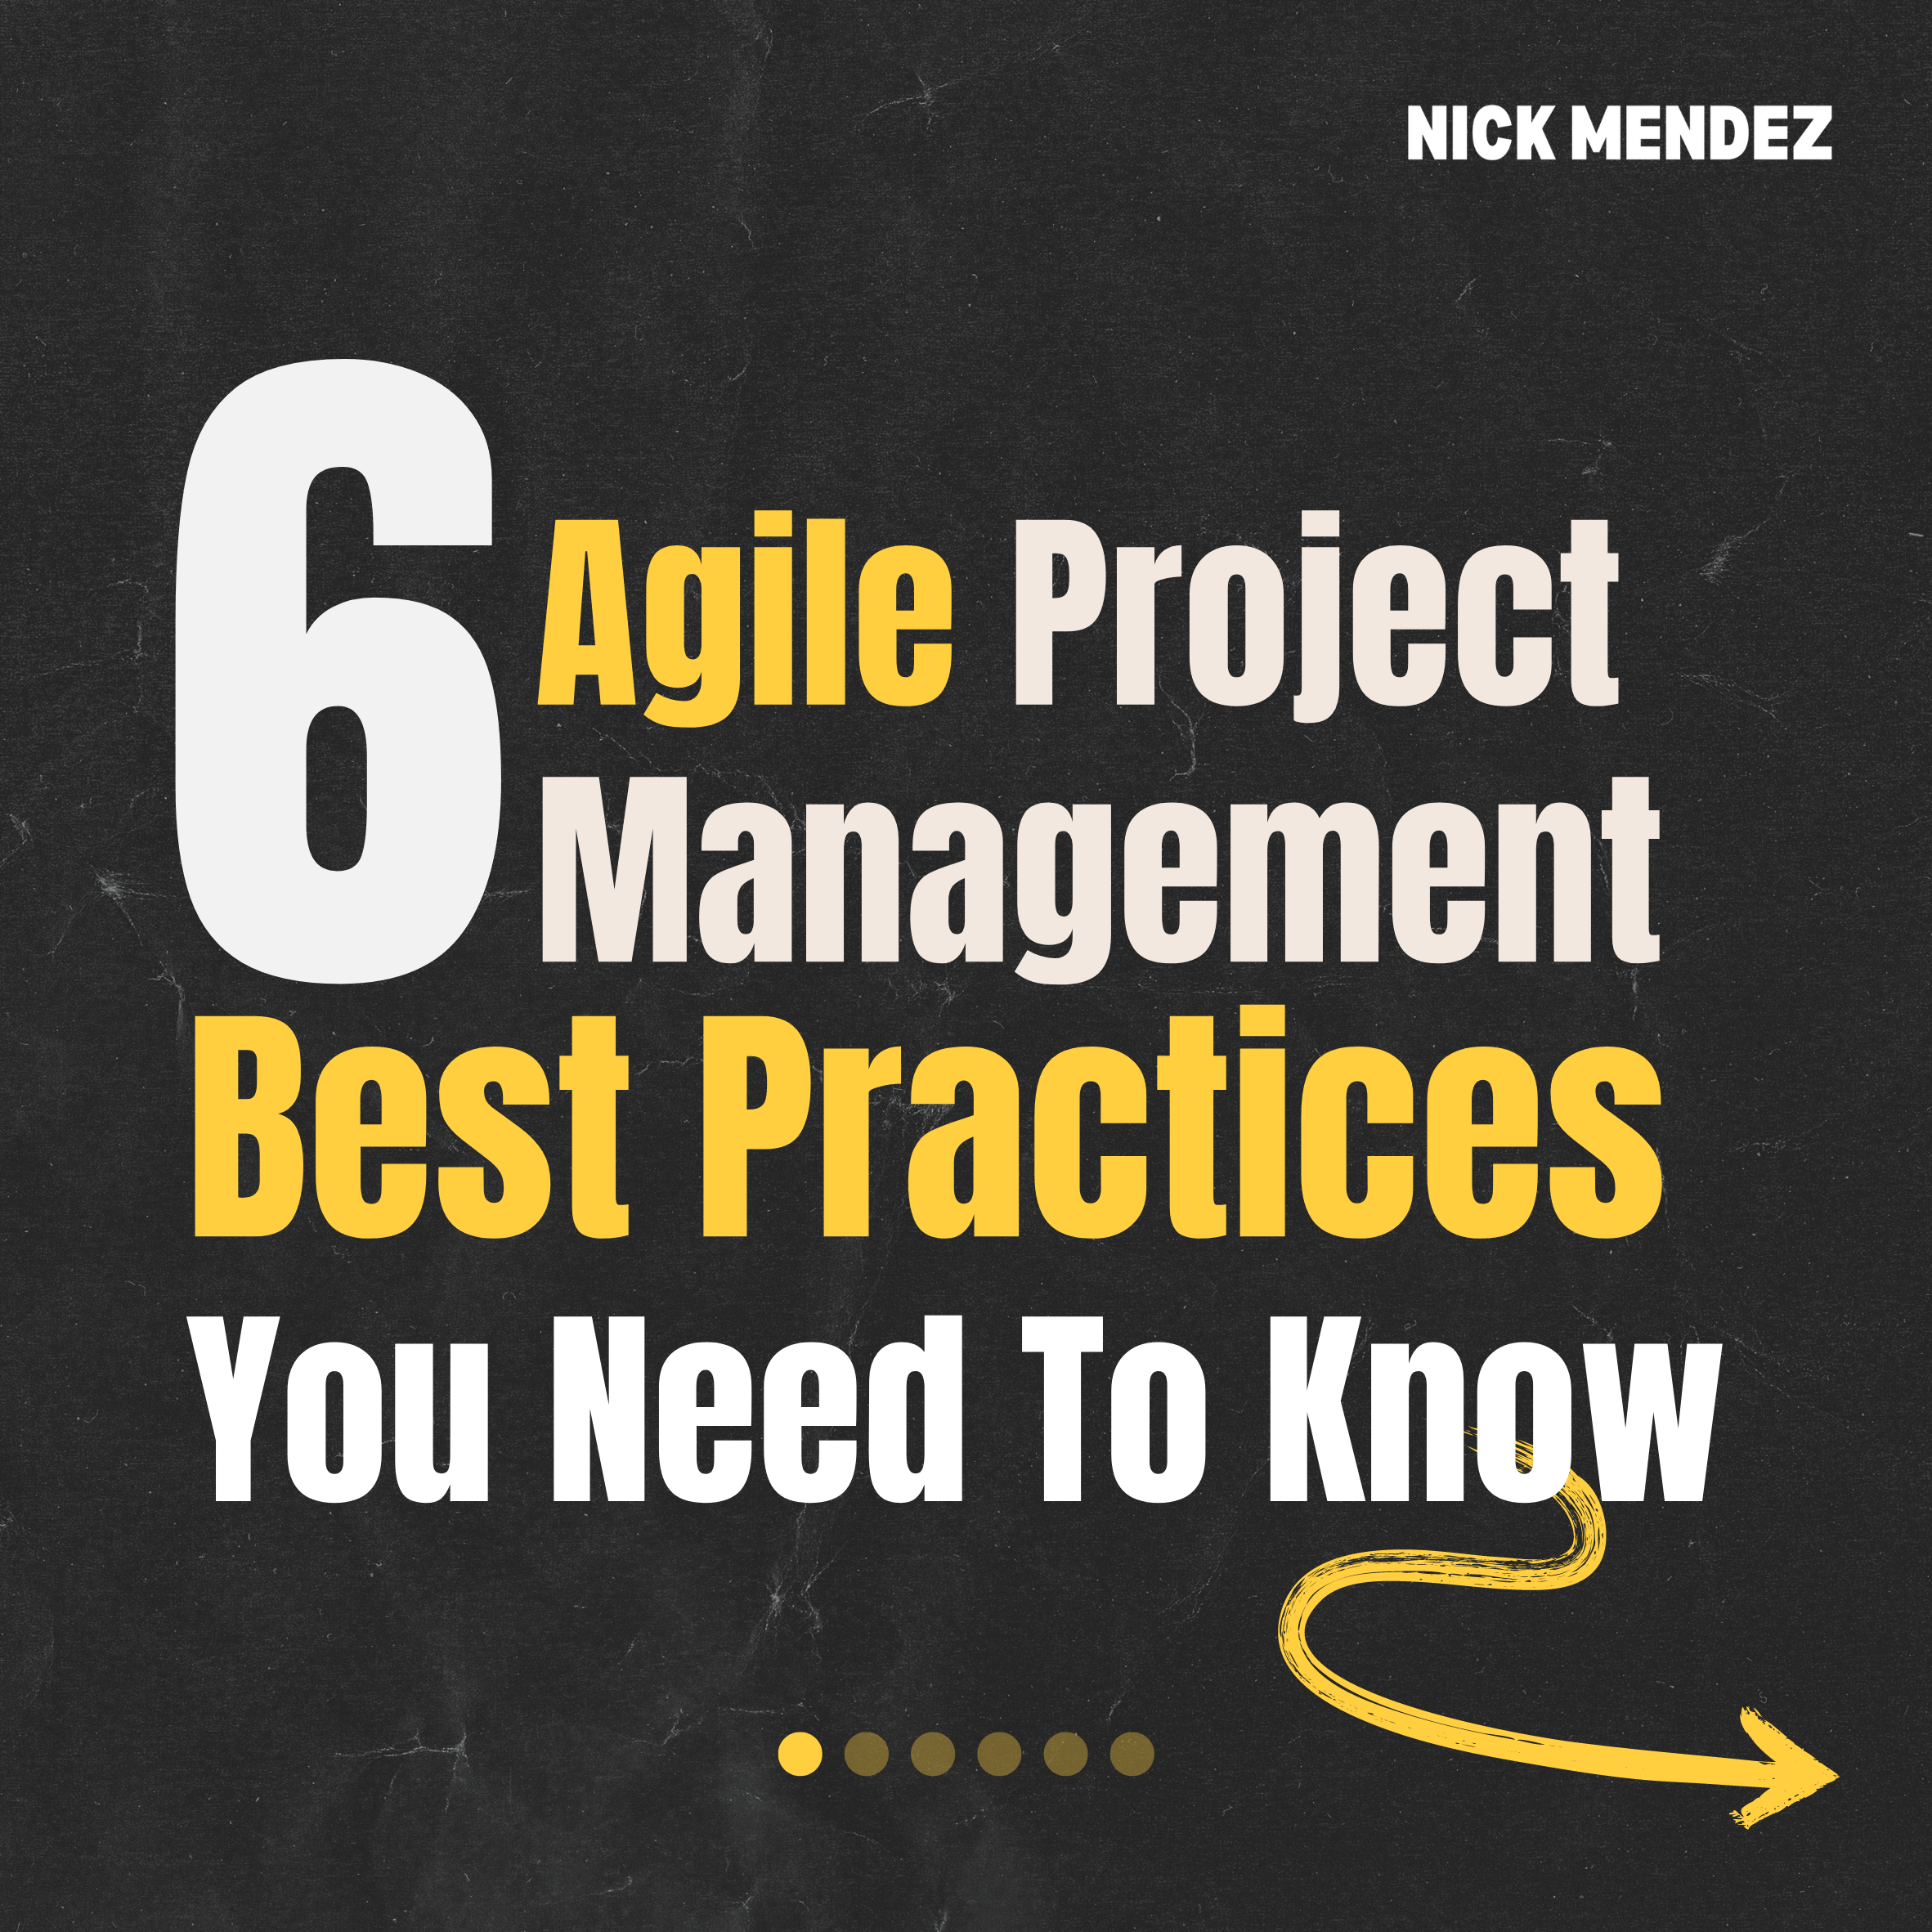 6 Agile Project Management Best Practices You Need To Know by Nick Mendez, PMP, Security+